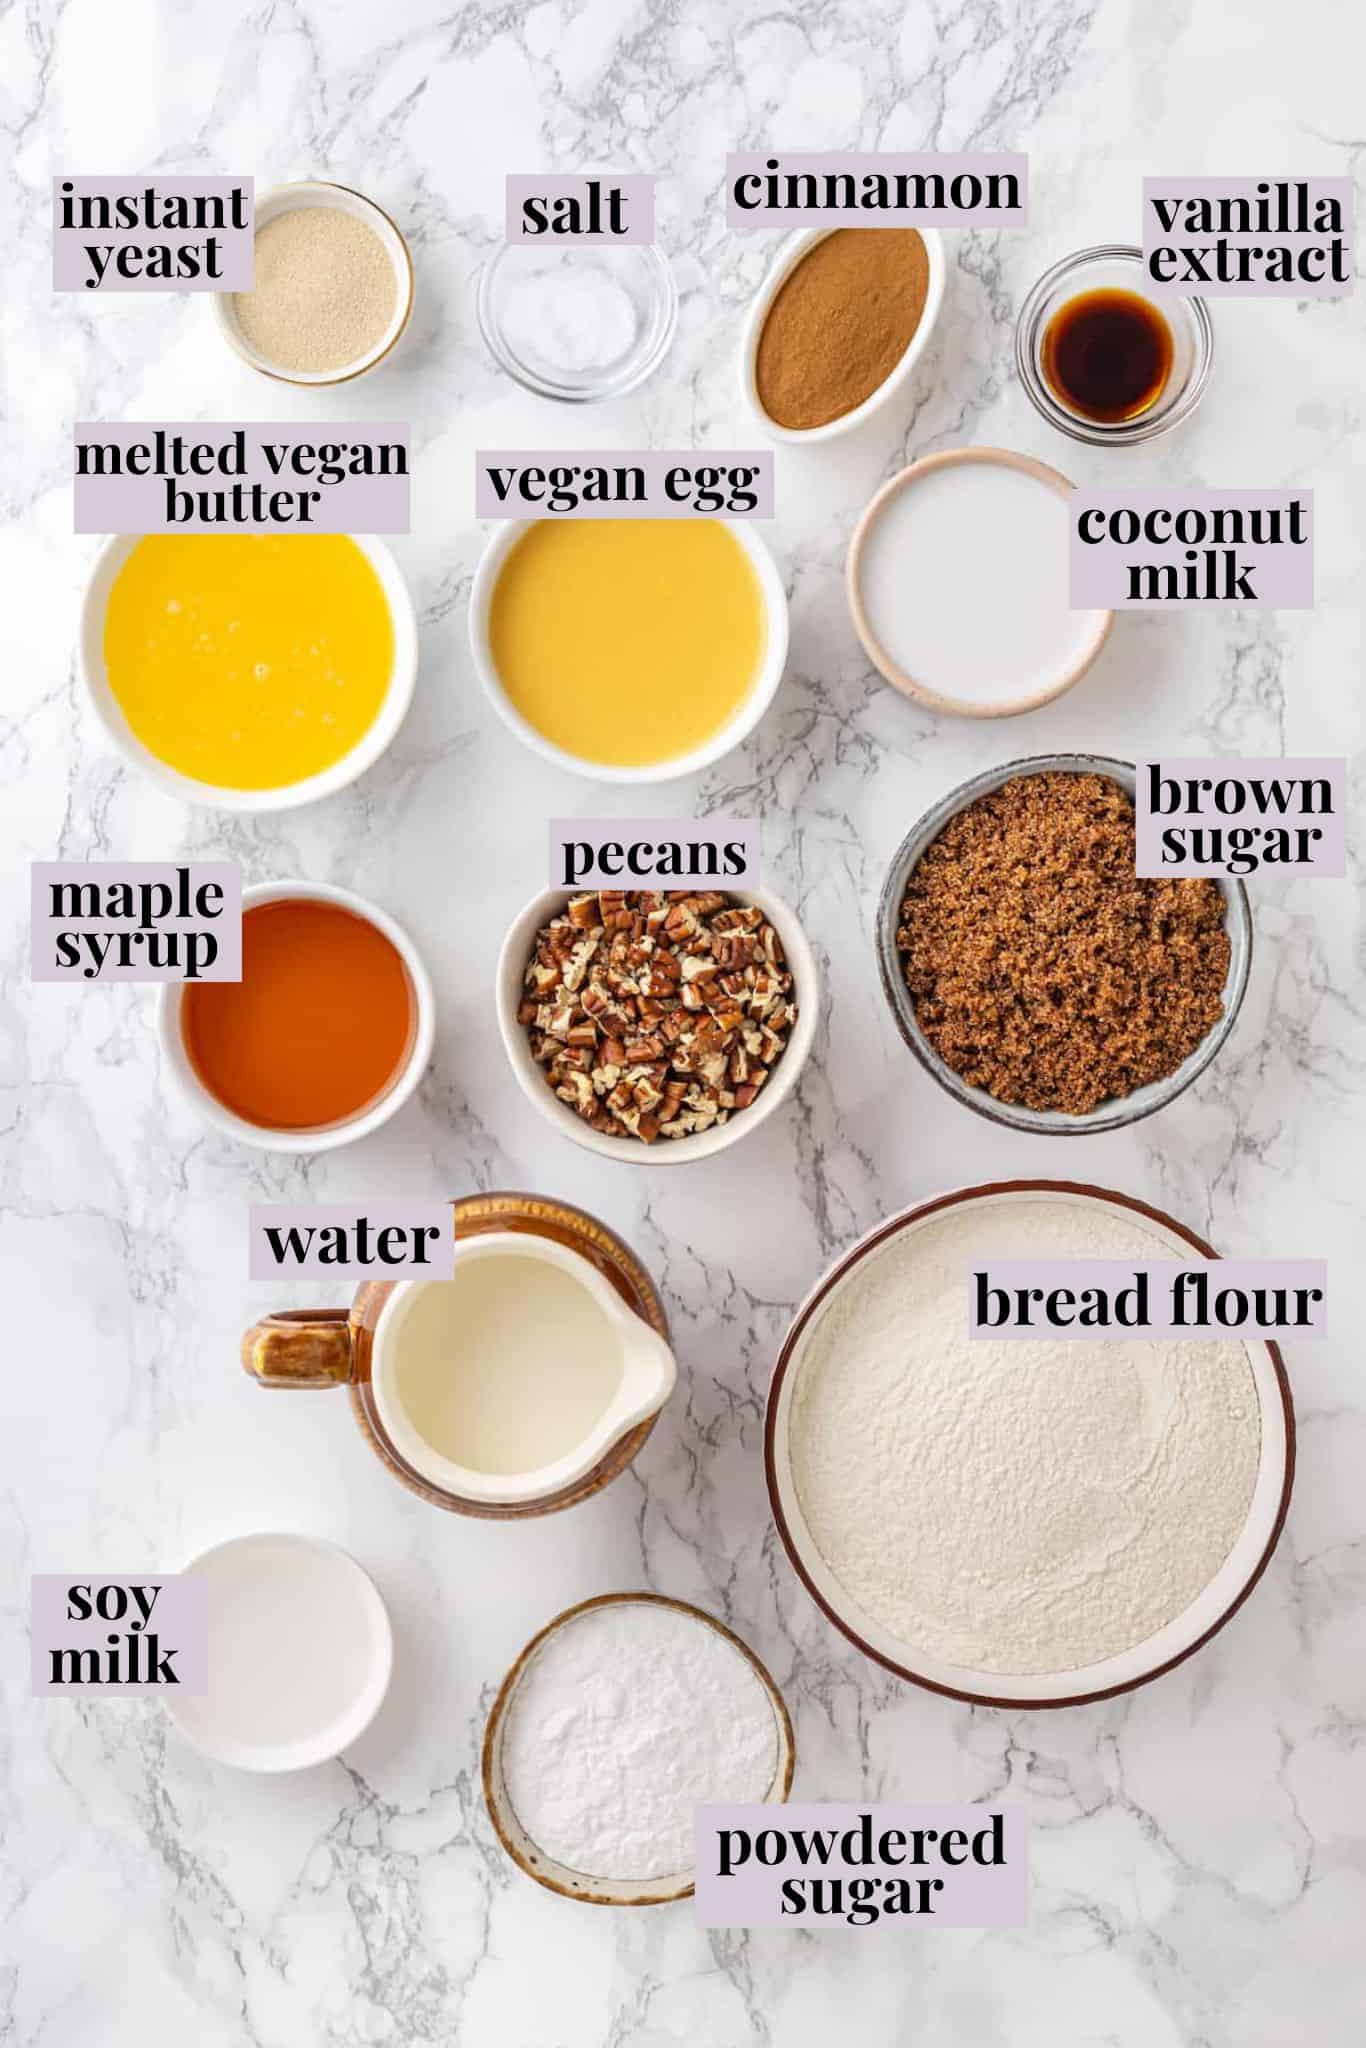 Overhead view of ingredients for cinnamon roll French toast